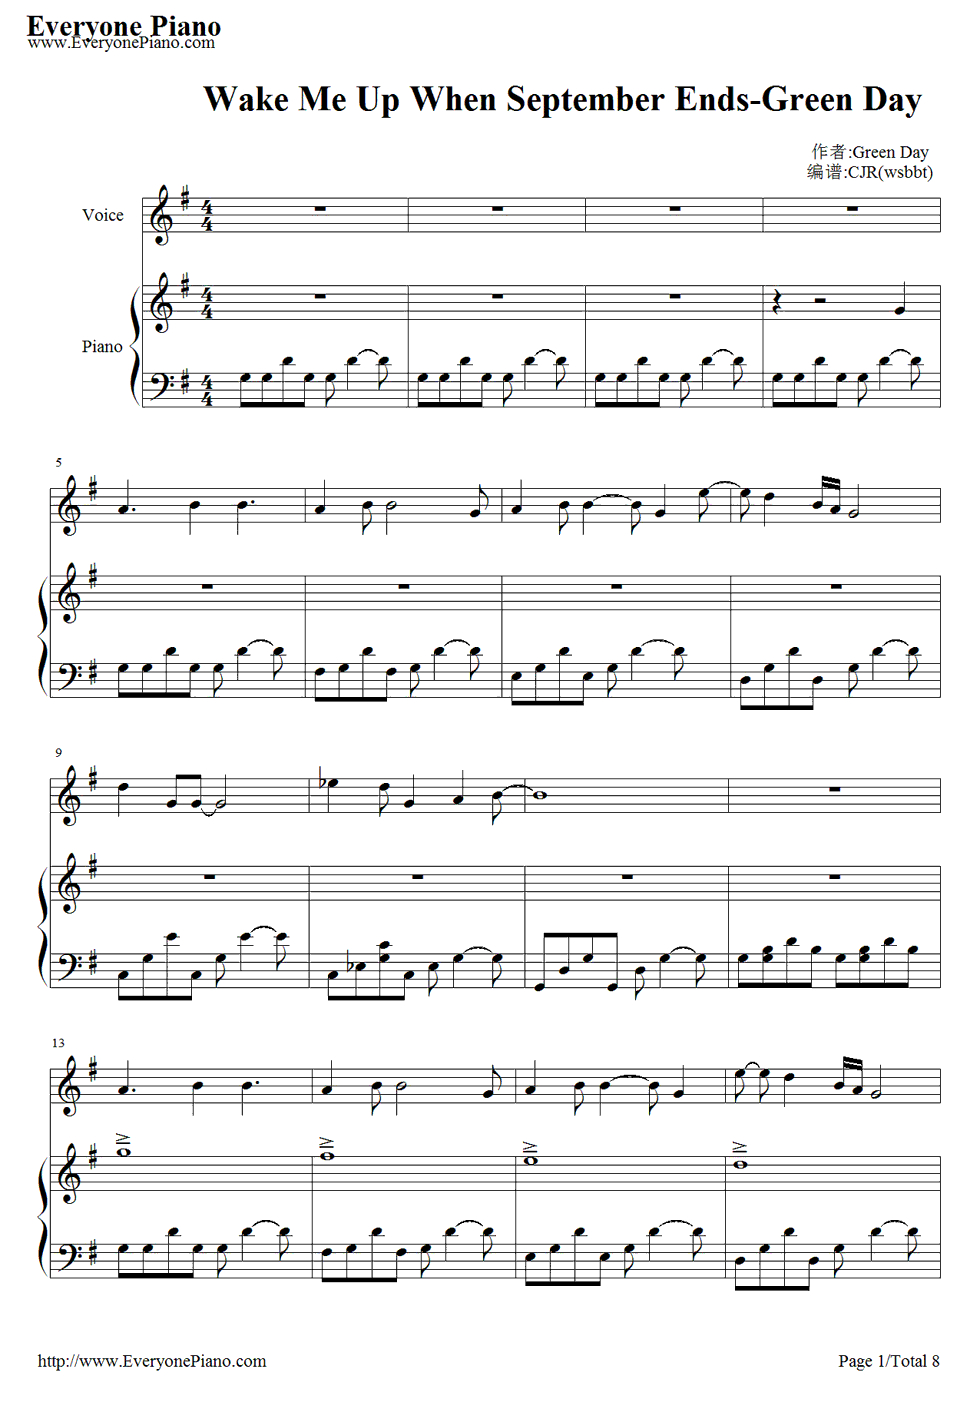 Wake Me Up When September Ends Chords Wake Me Up When September Ends Green Day Free Piano Sheet Music